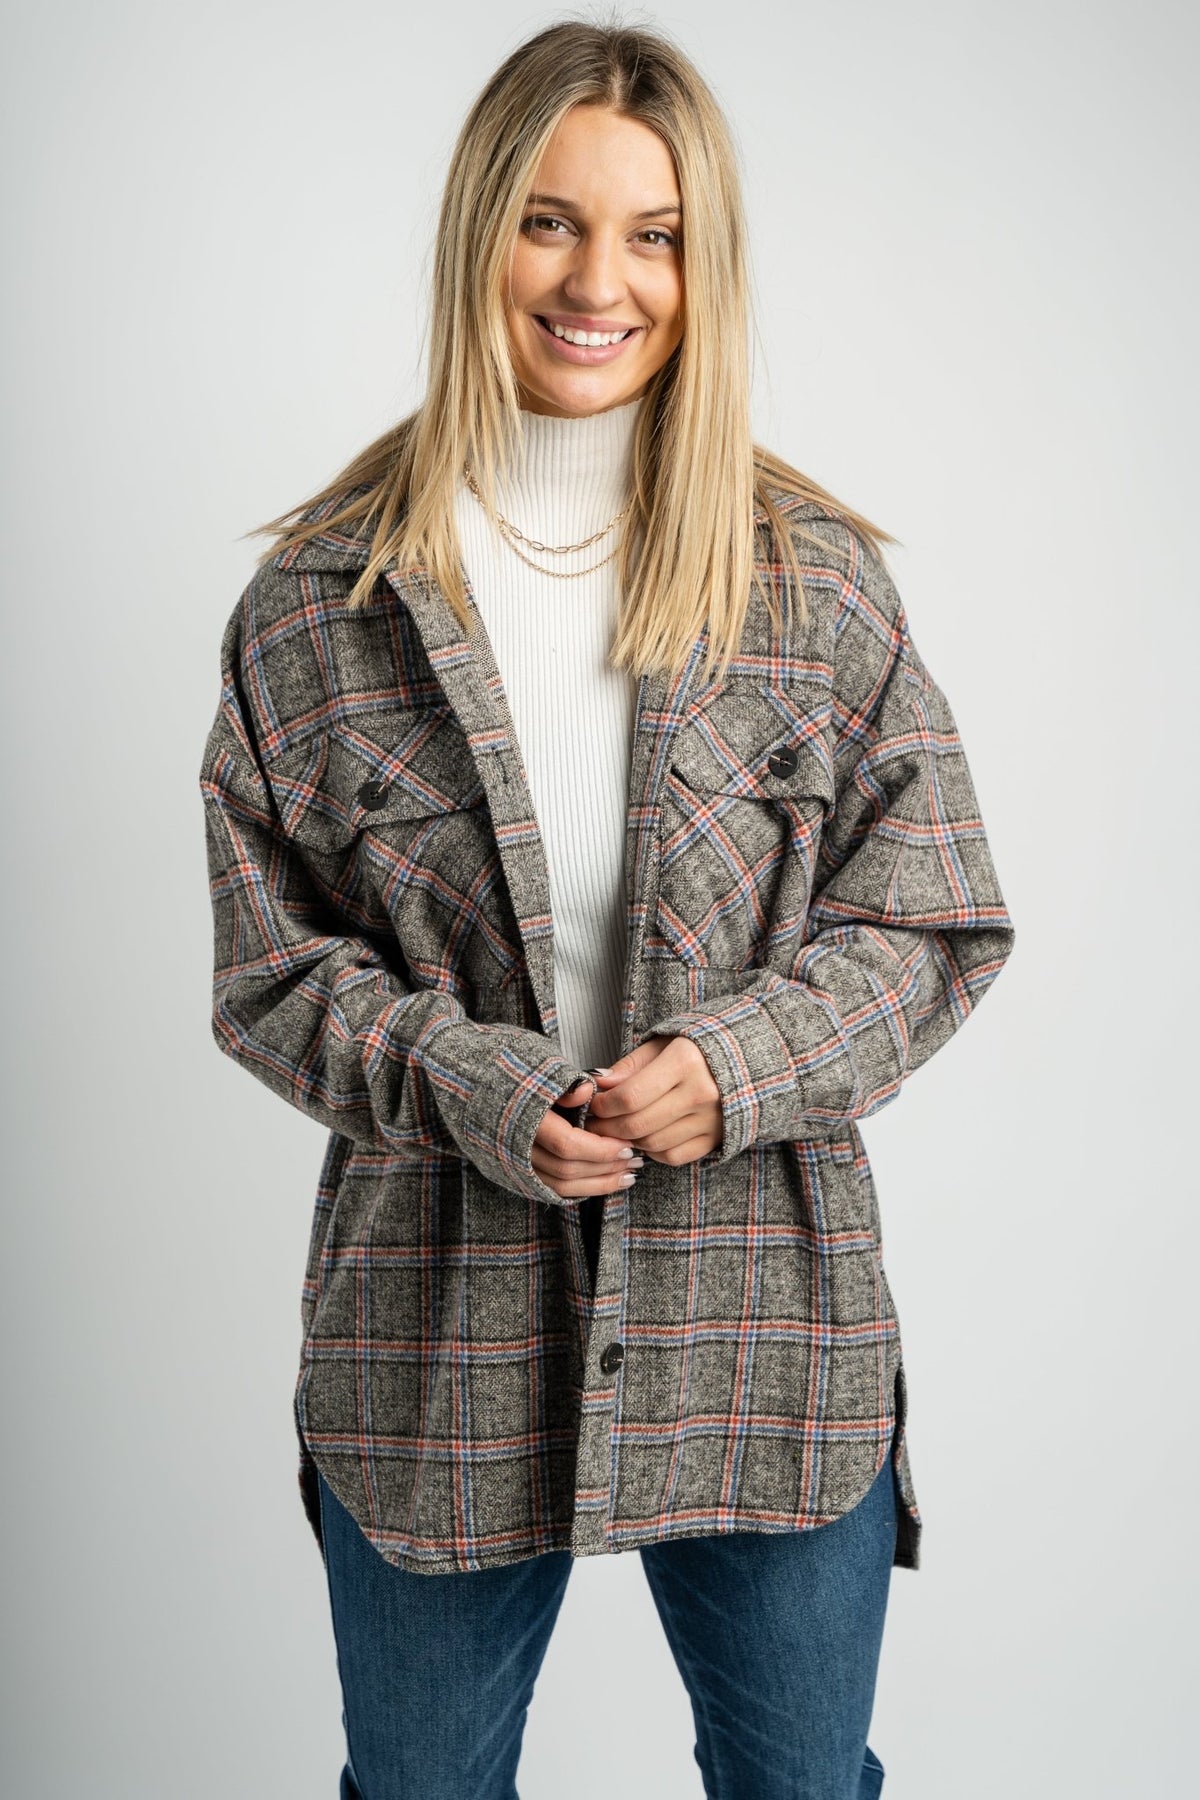 Oversized plaid shacket charcoal - Cute Shirts & Tops - Trendy Jackets and Blazers at Lush Fashion Lounge Boutique in Oklahoma City